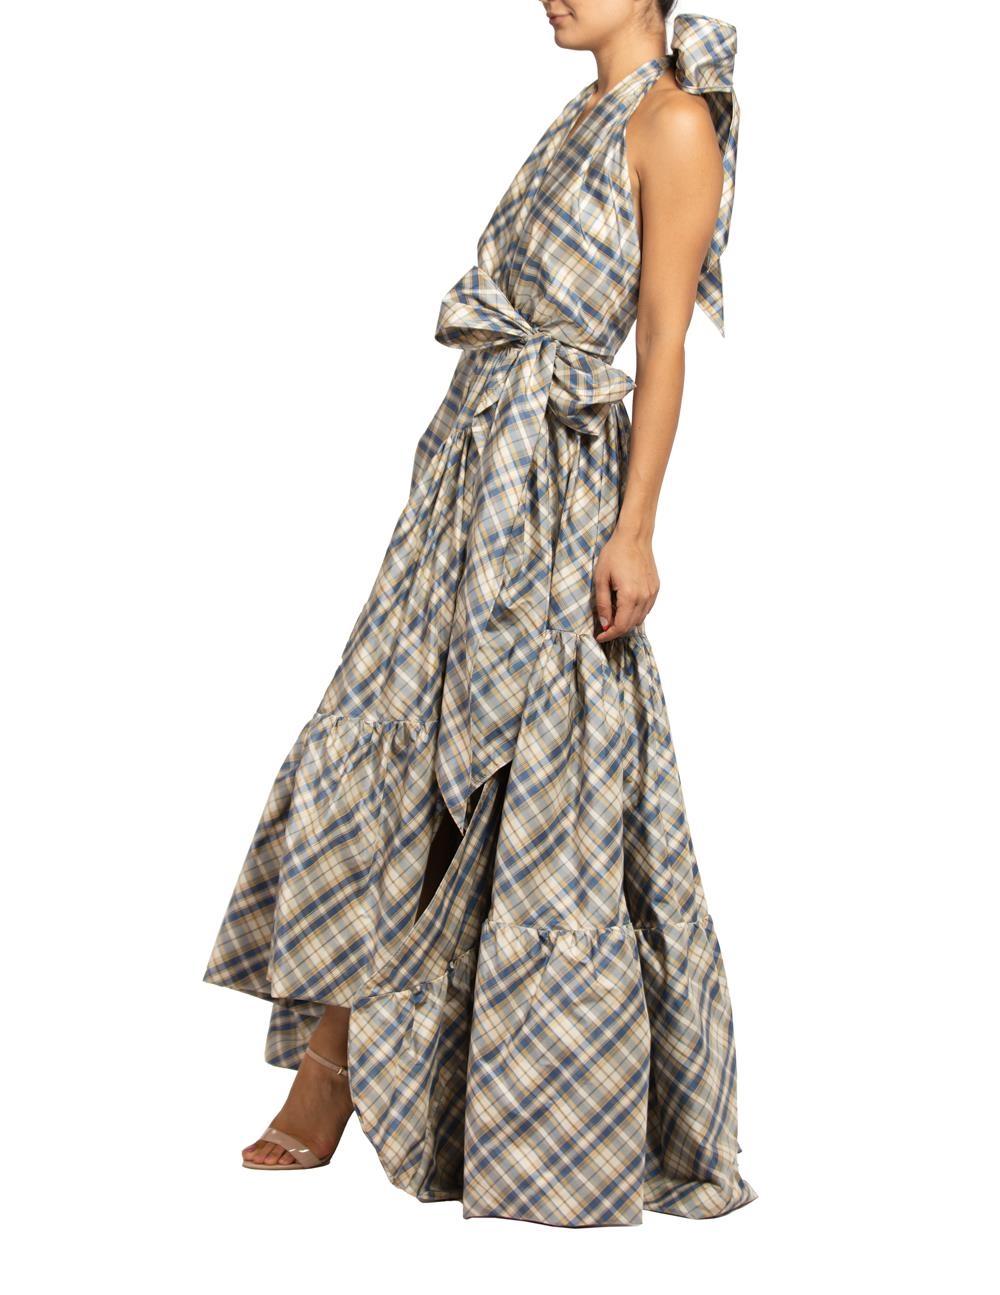 MORPHEW COLLECTION Blue & Yellow Silk Taffeta Plaid Gown MASTER
MORPHEW COLLECTION is made entirely by hand in our NYC Ateliér of rare antique materials sourced from around the globe. Our sustainable vintage materials represent over a century of